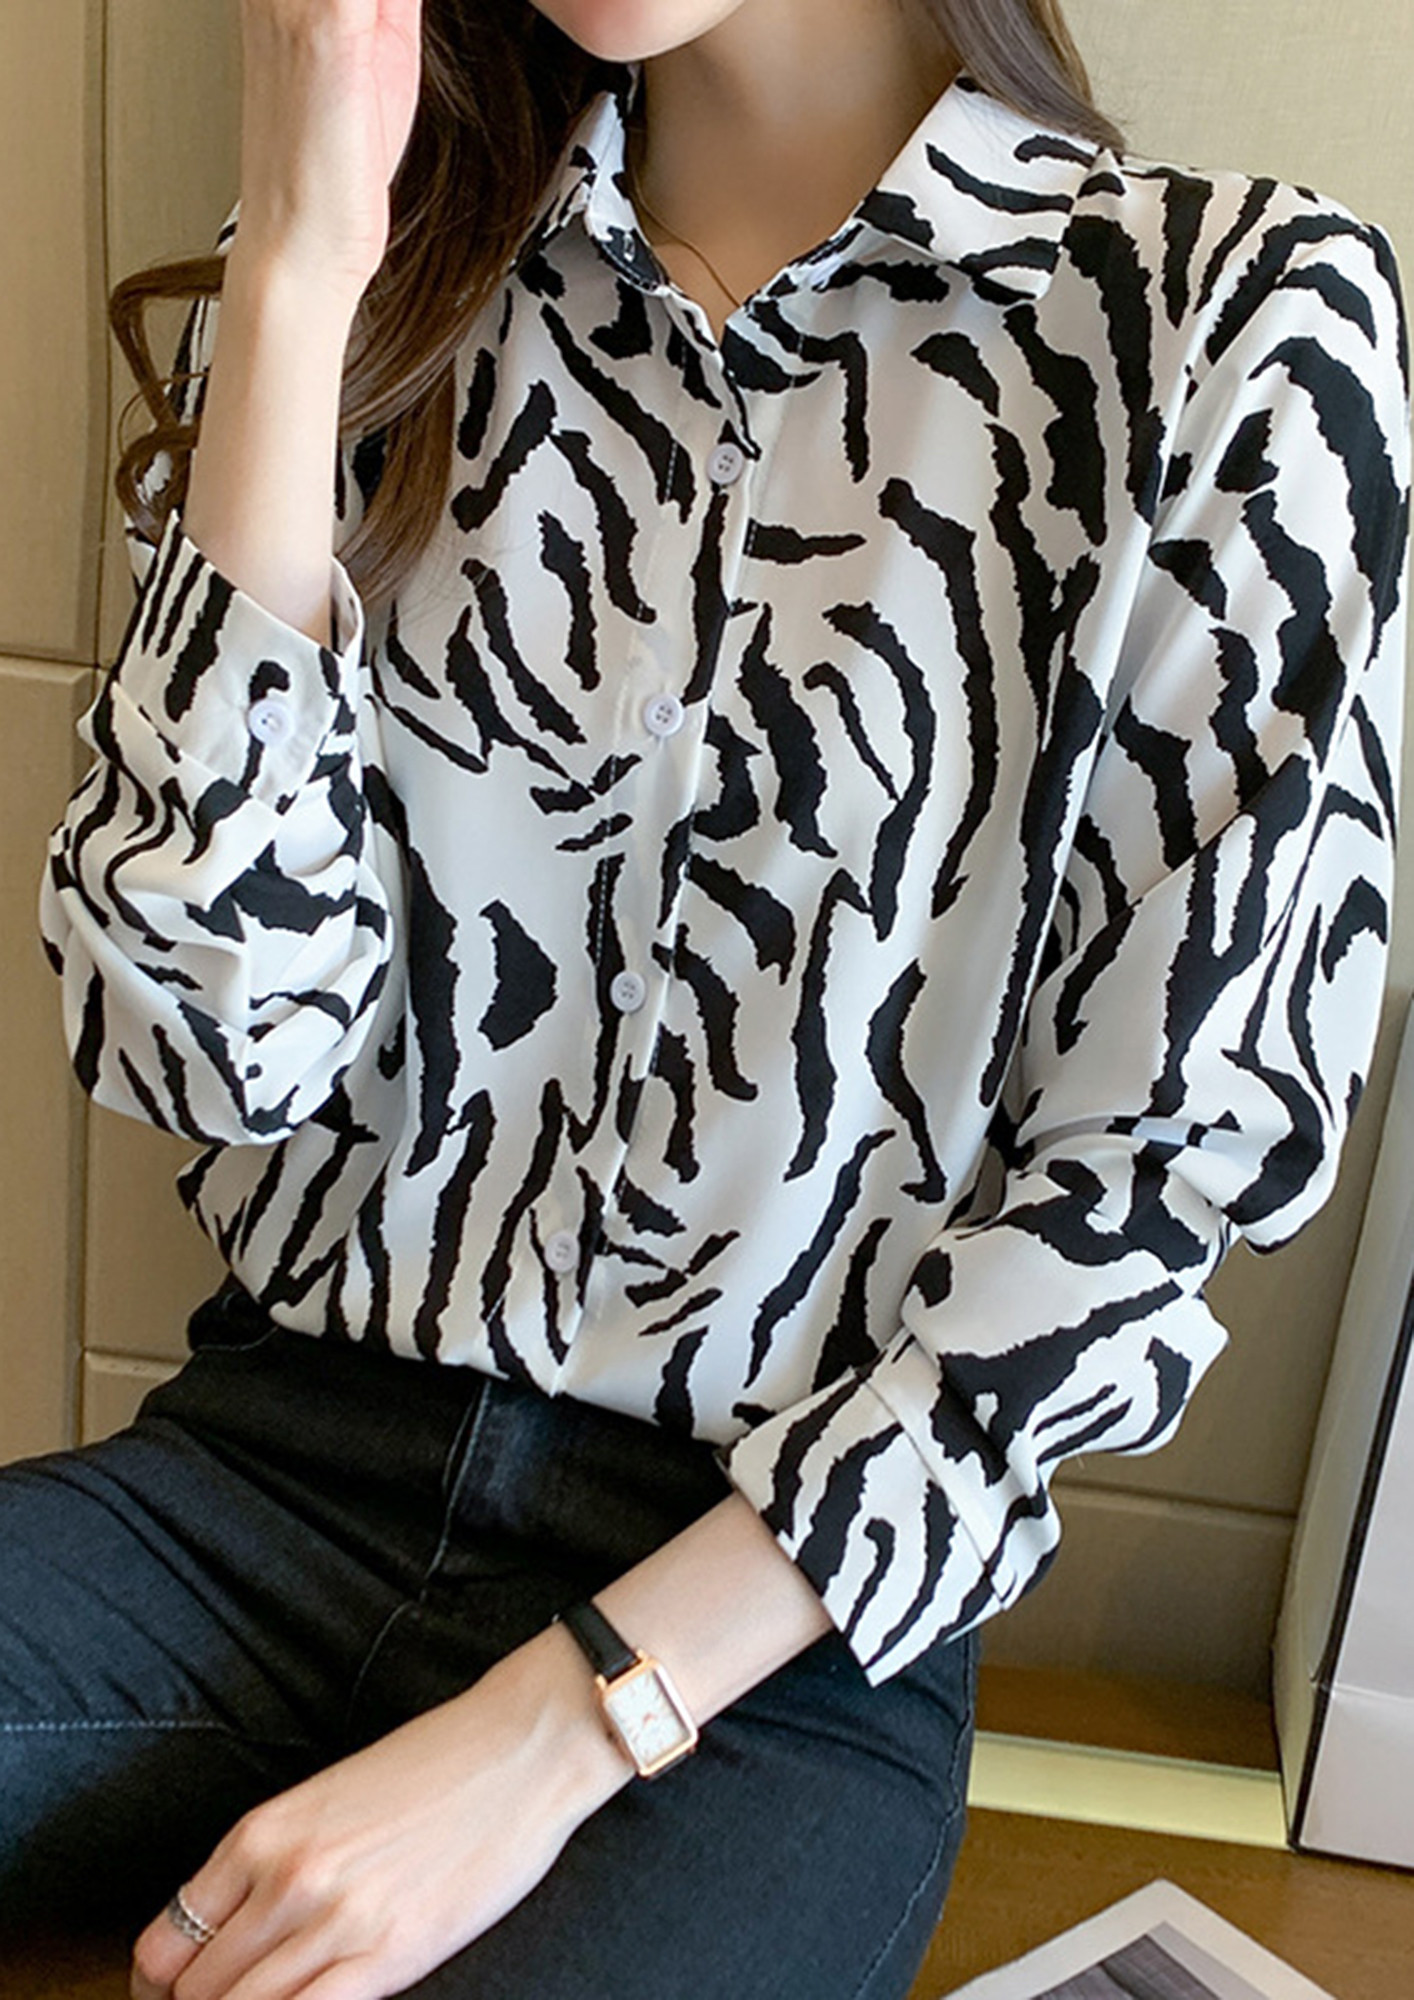 CHIC IN LEOPARD PRINT BLACK AND WHITE SHIRT